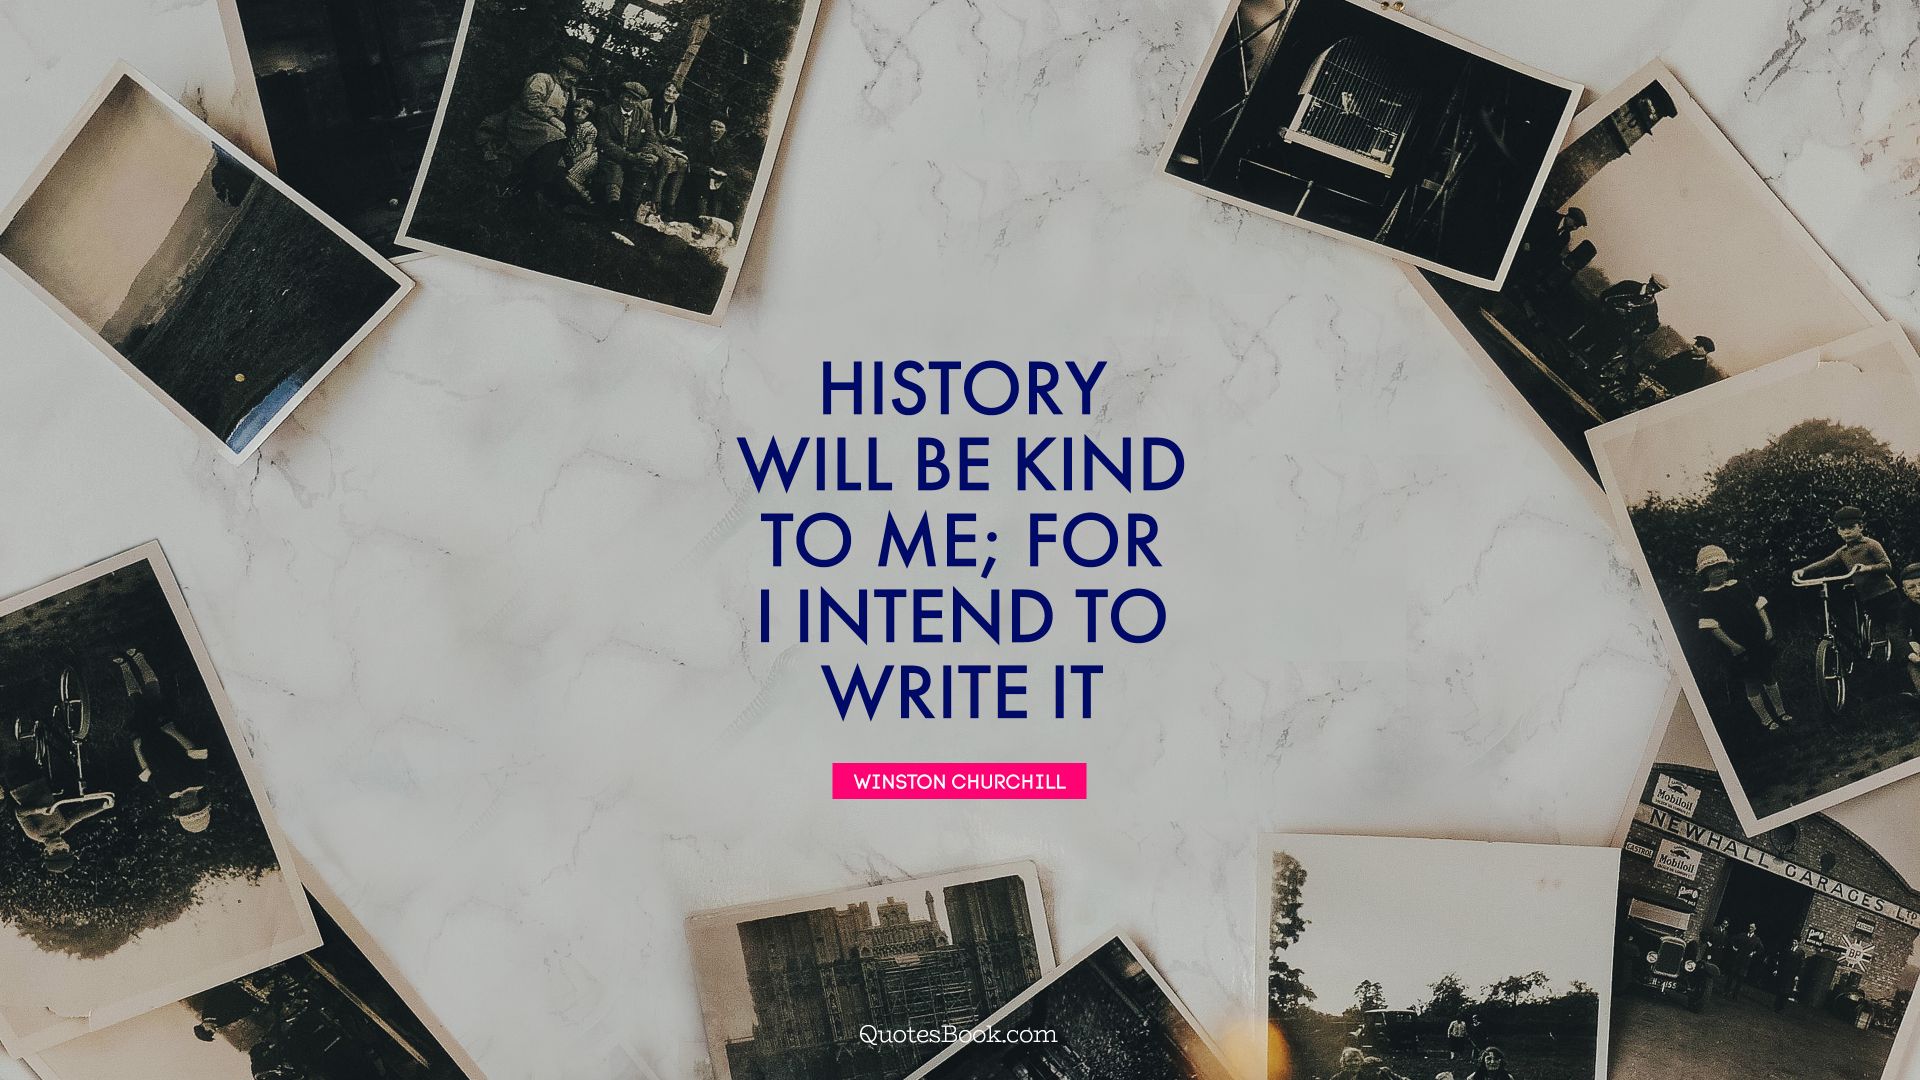 History will be kind to me; for I intend to write it. - Quote by Winston Churchill